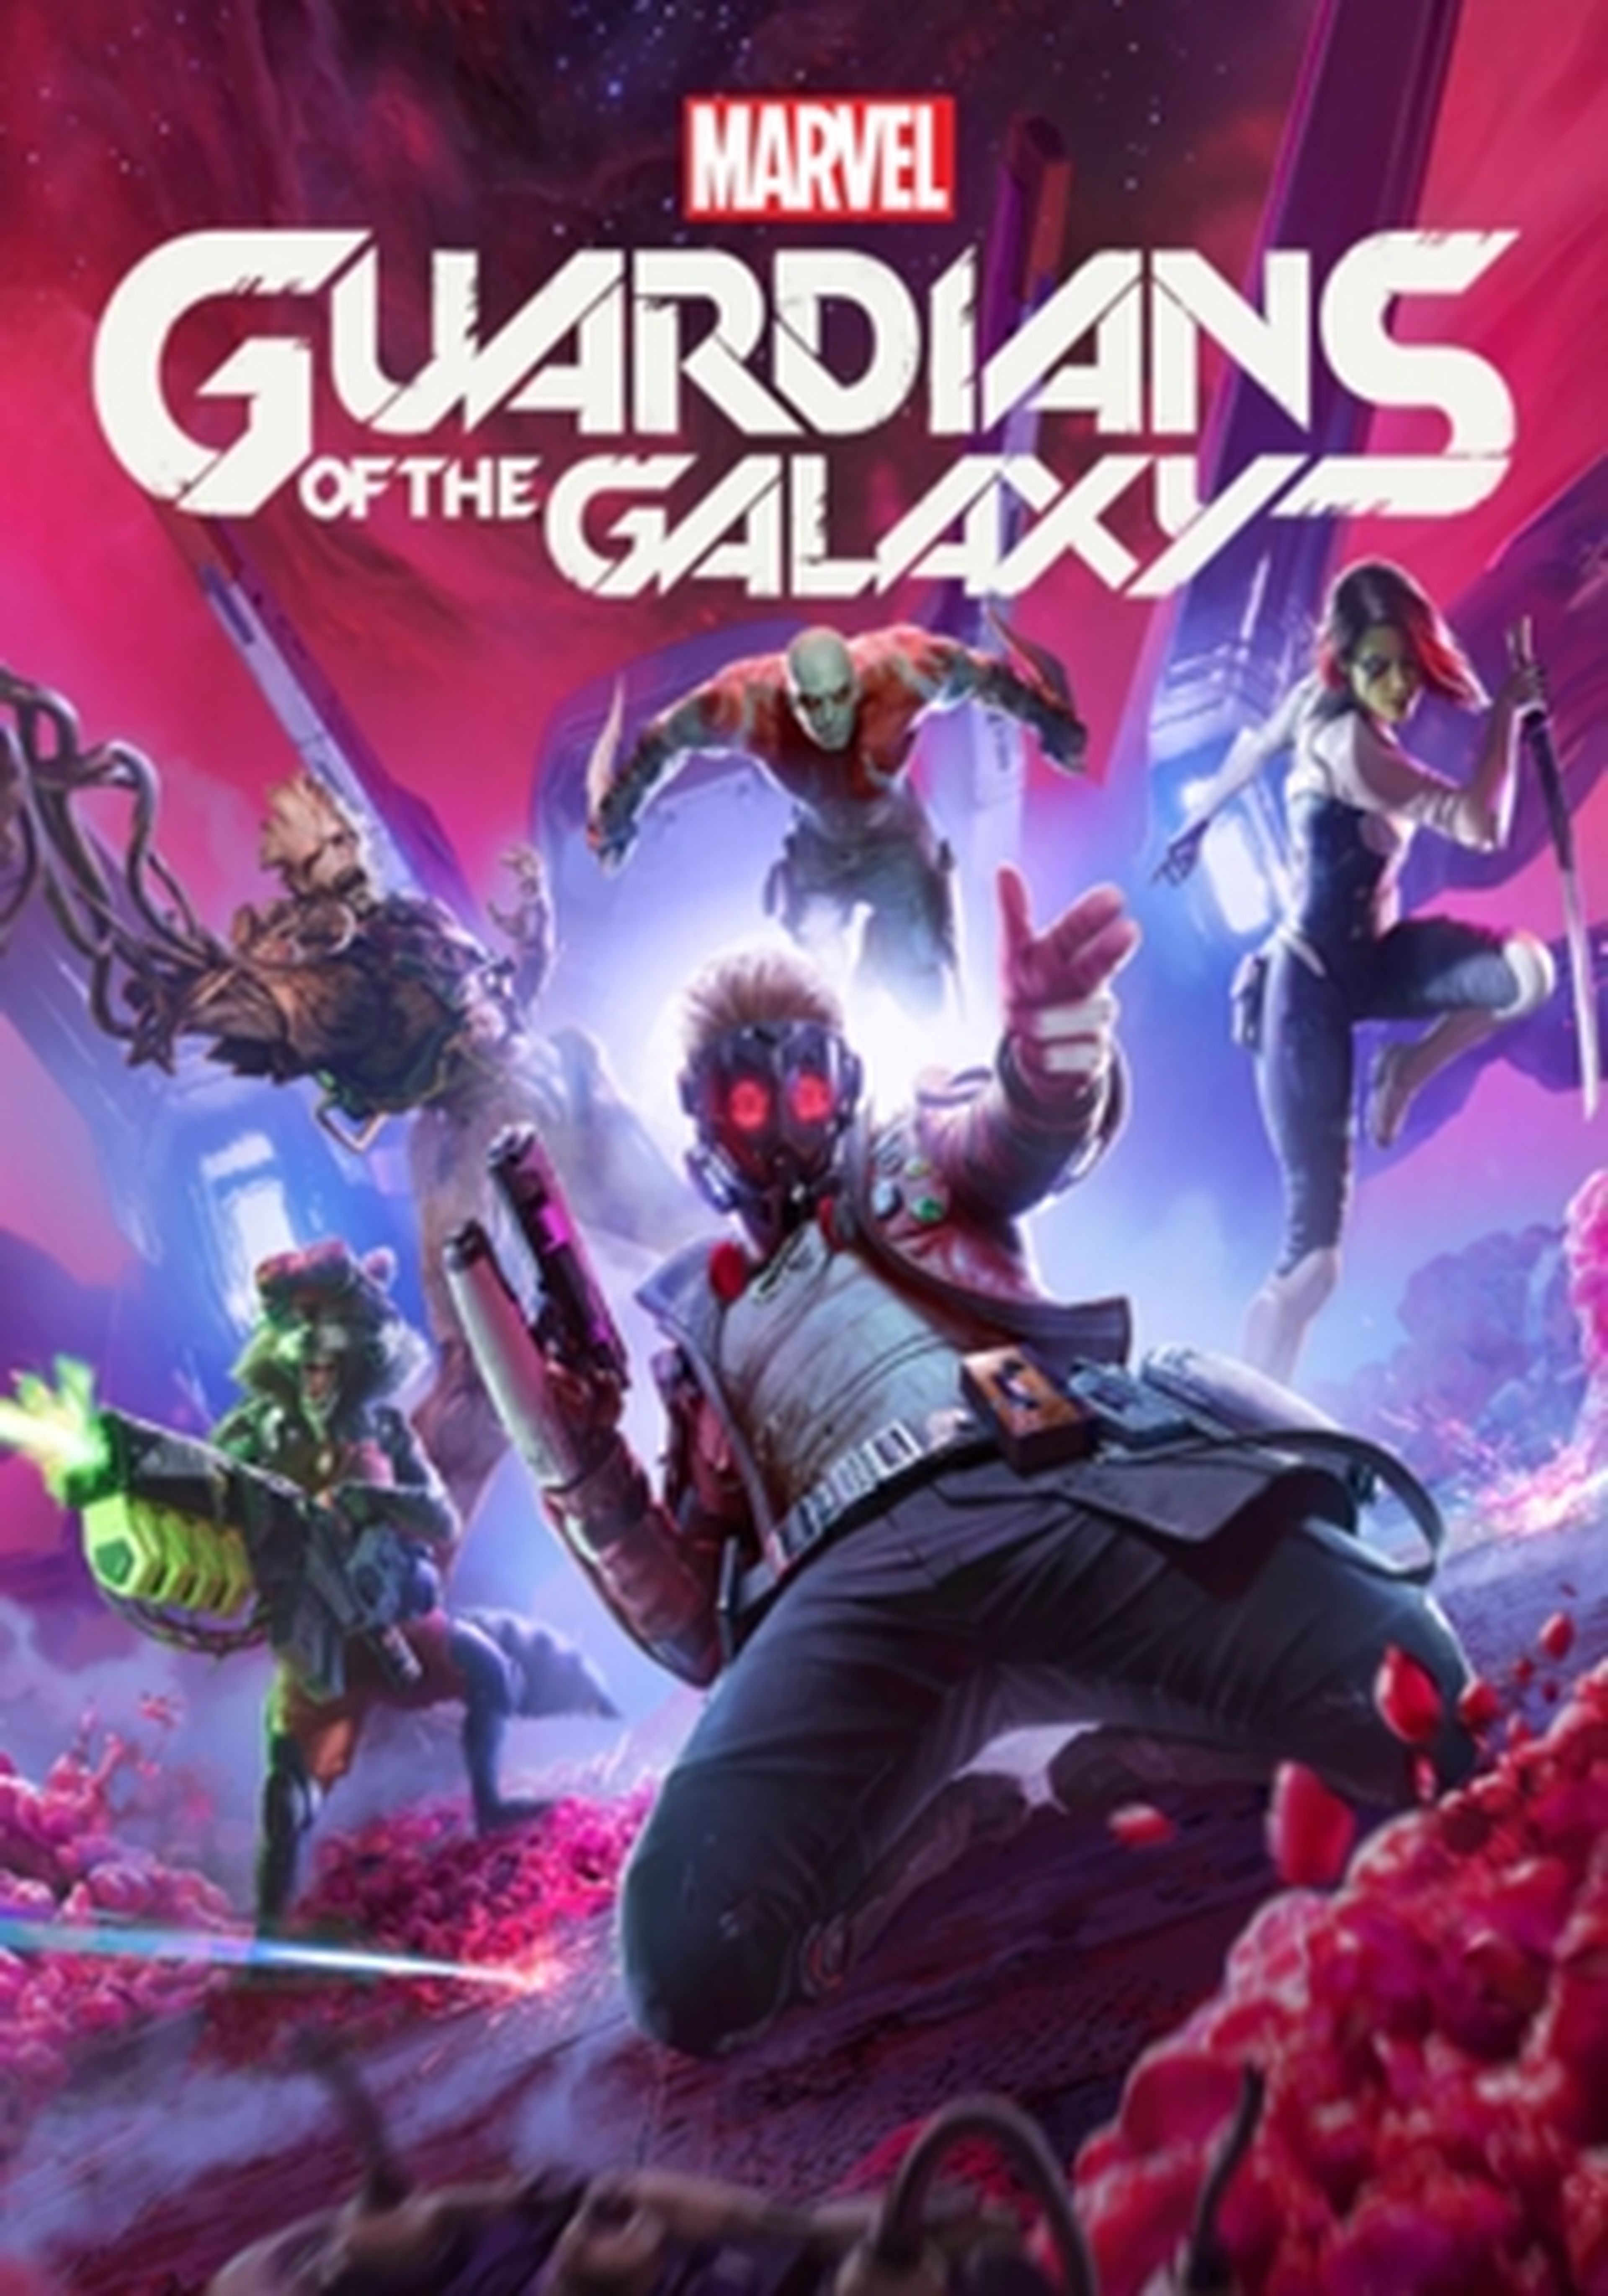 Marvel's Guardians of the Galaxy cartel